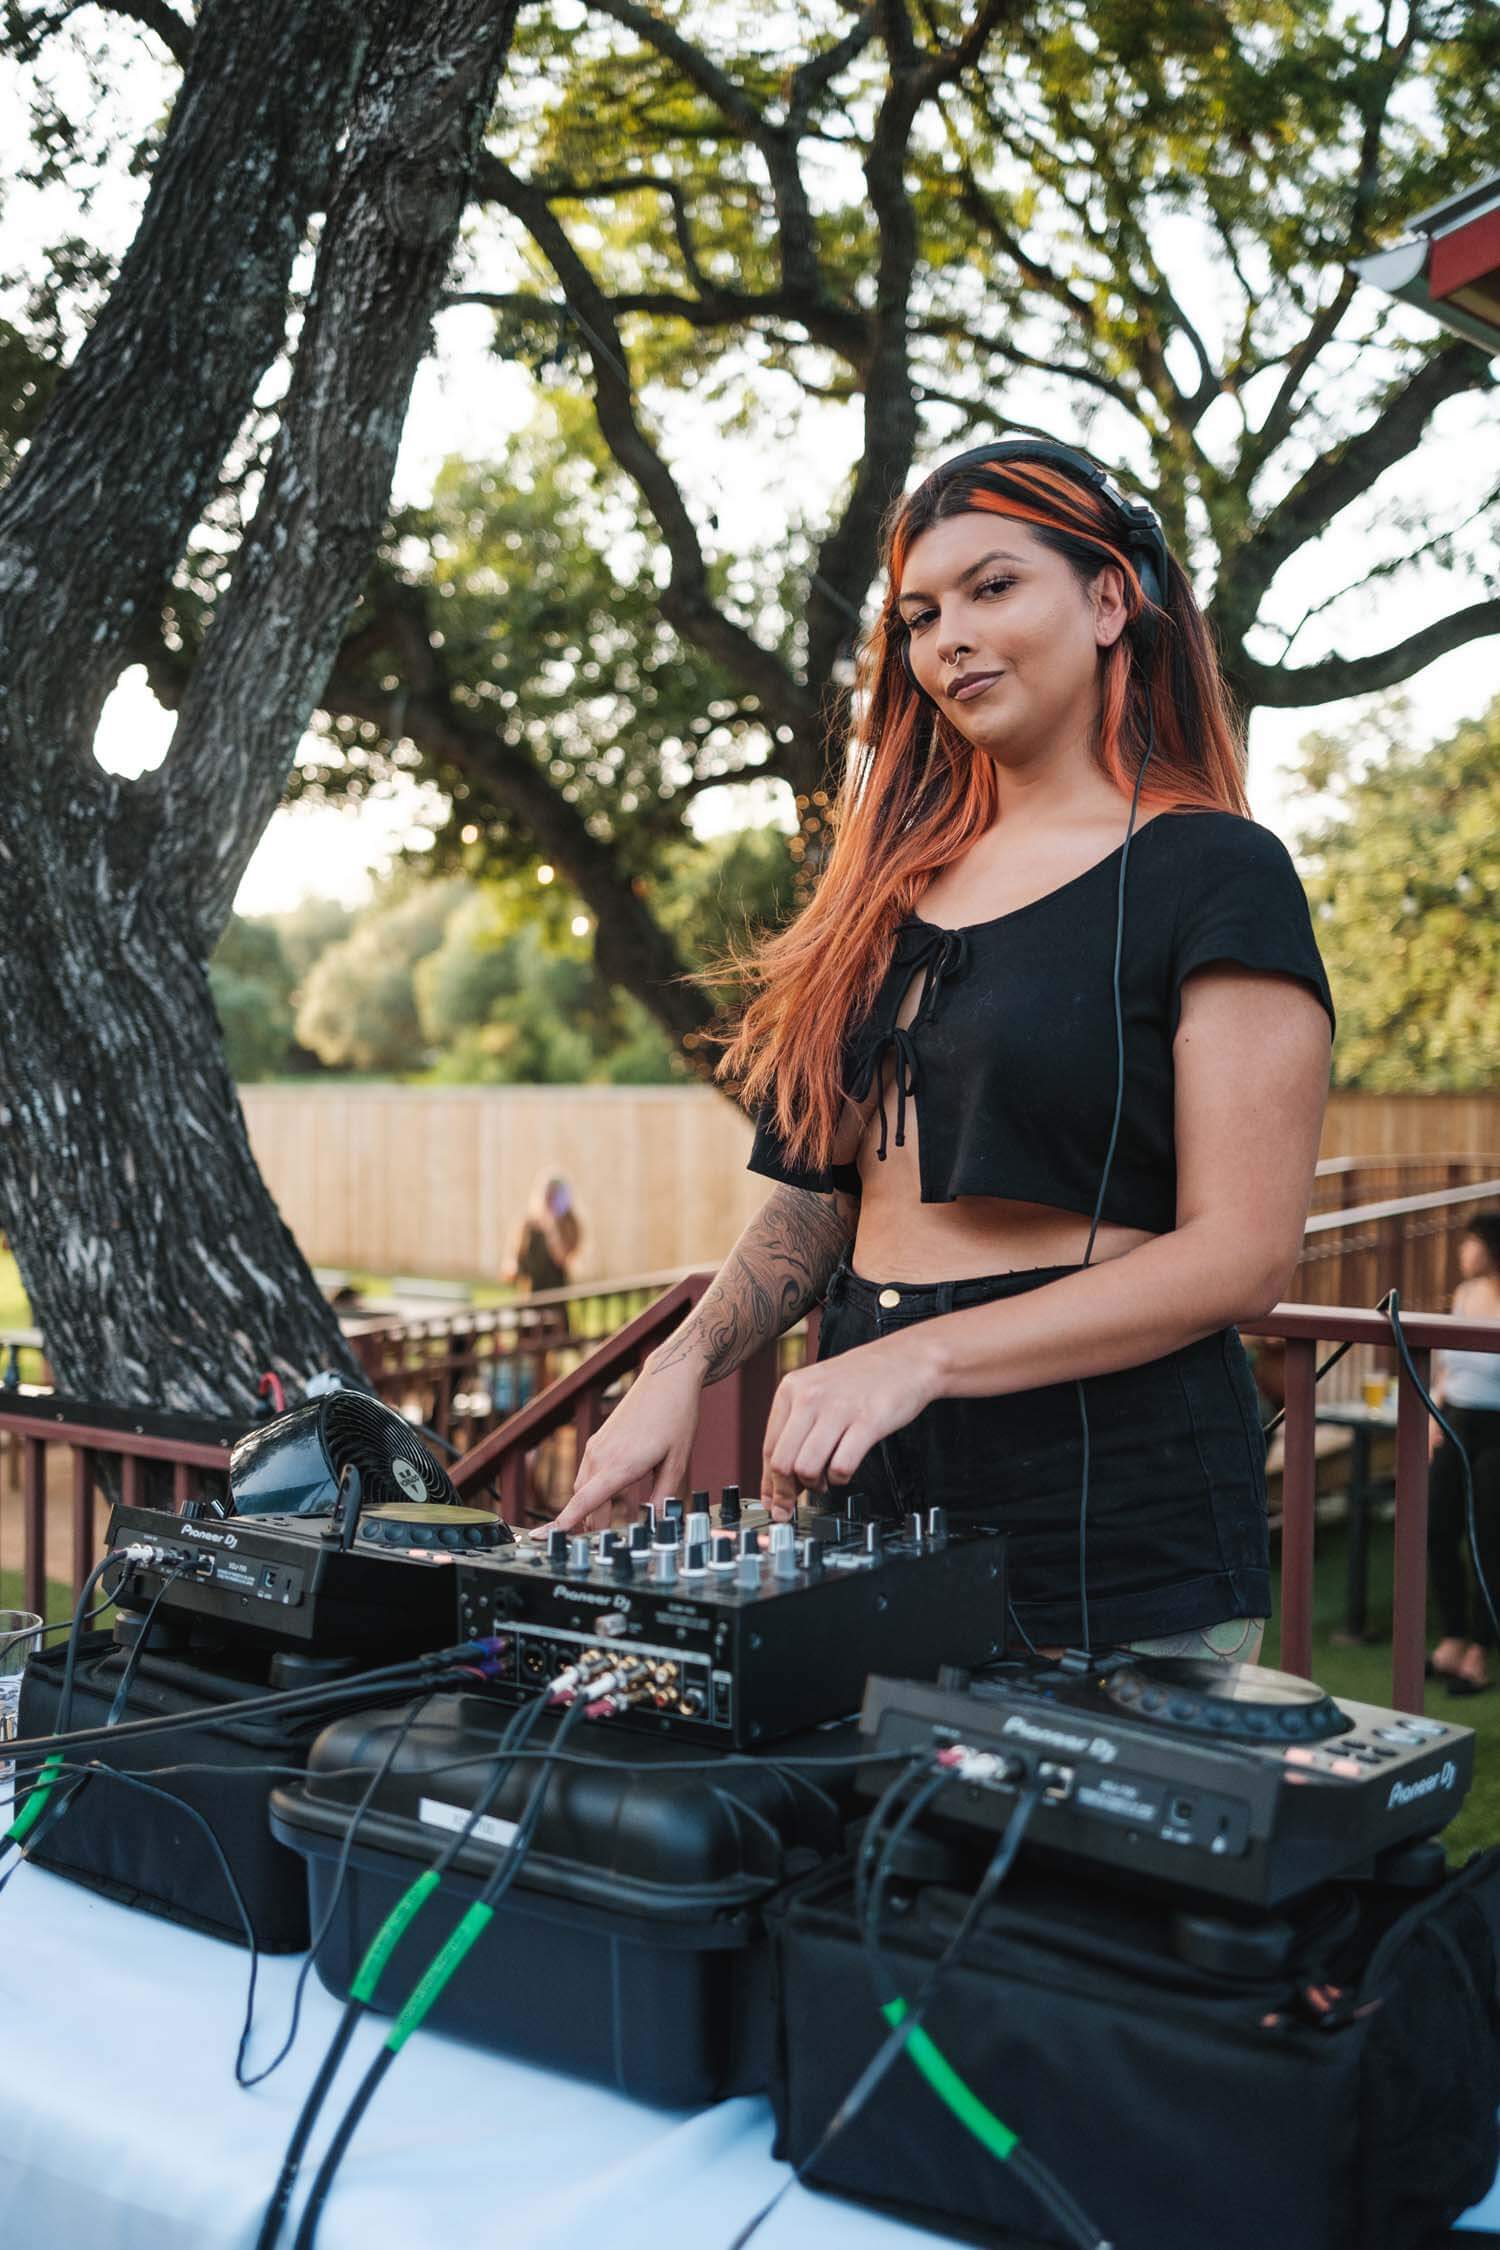 Young woman with orange hair behind outdoor DJ booth